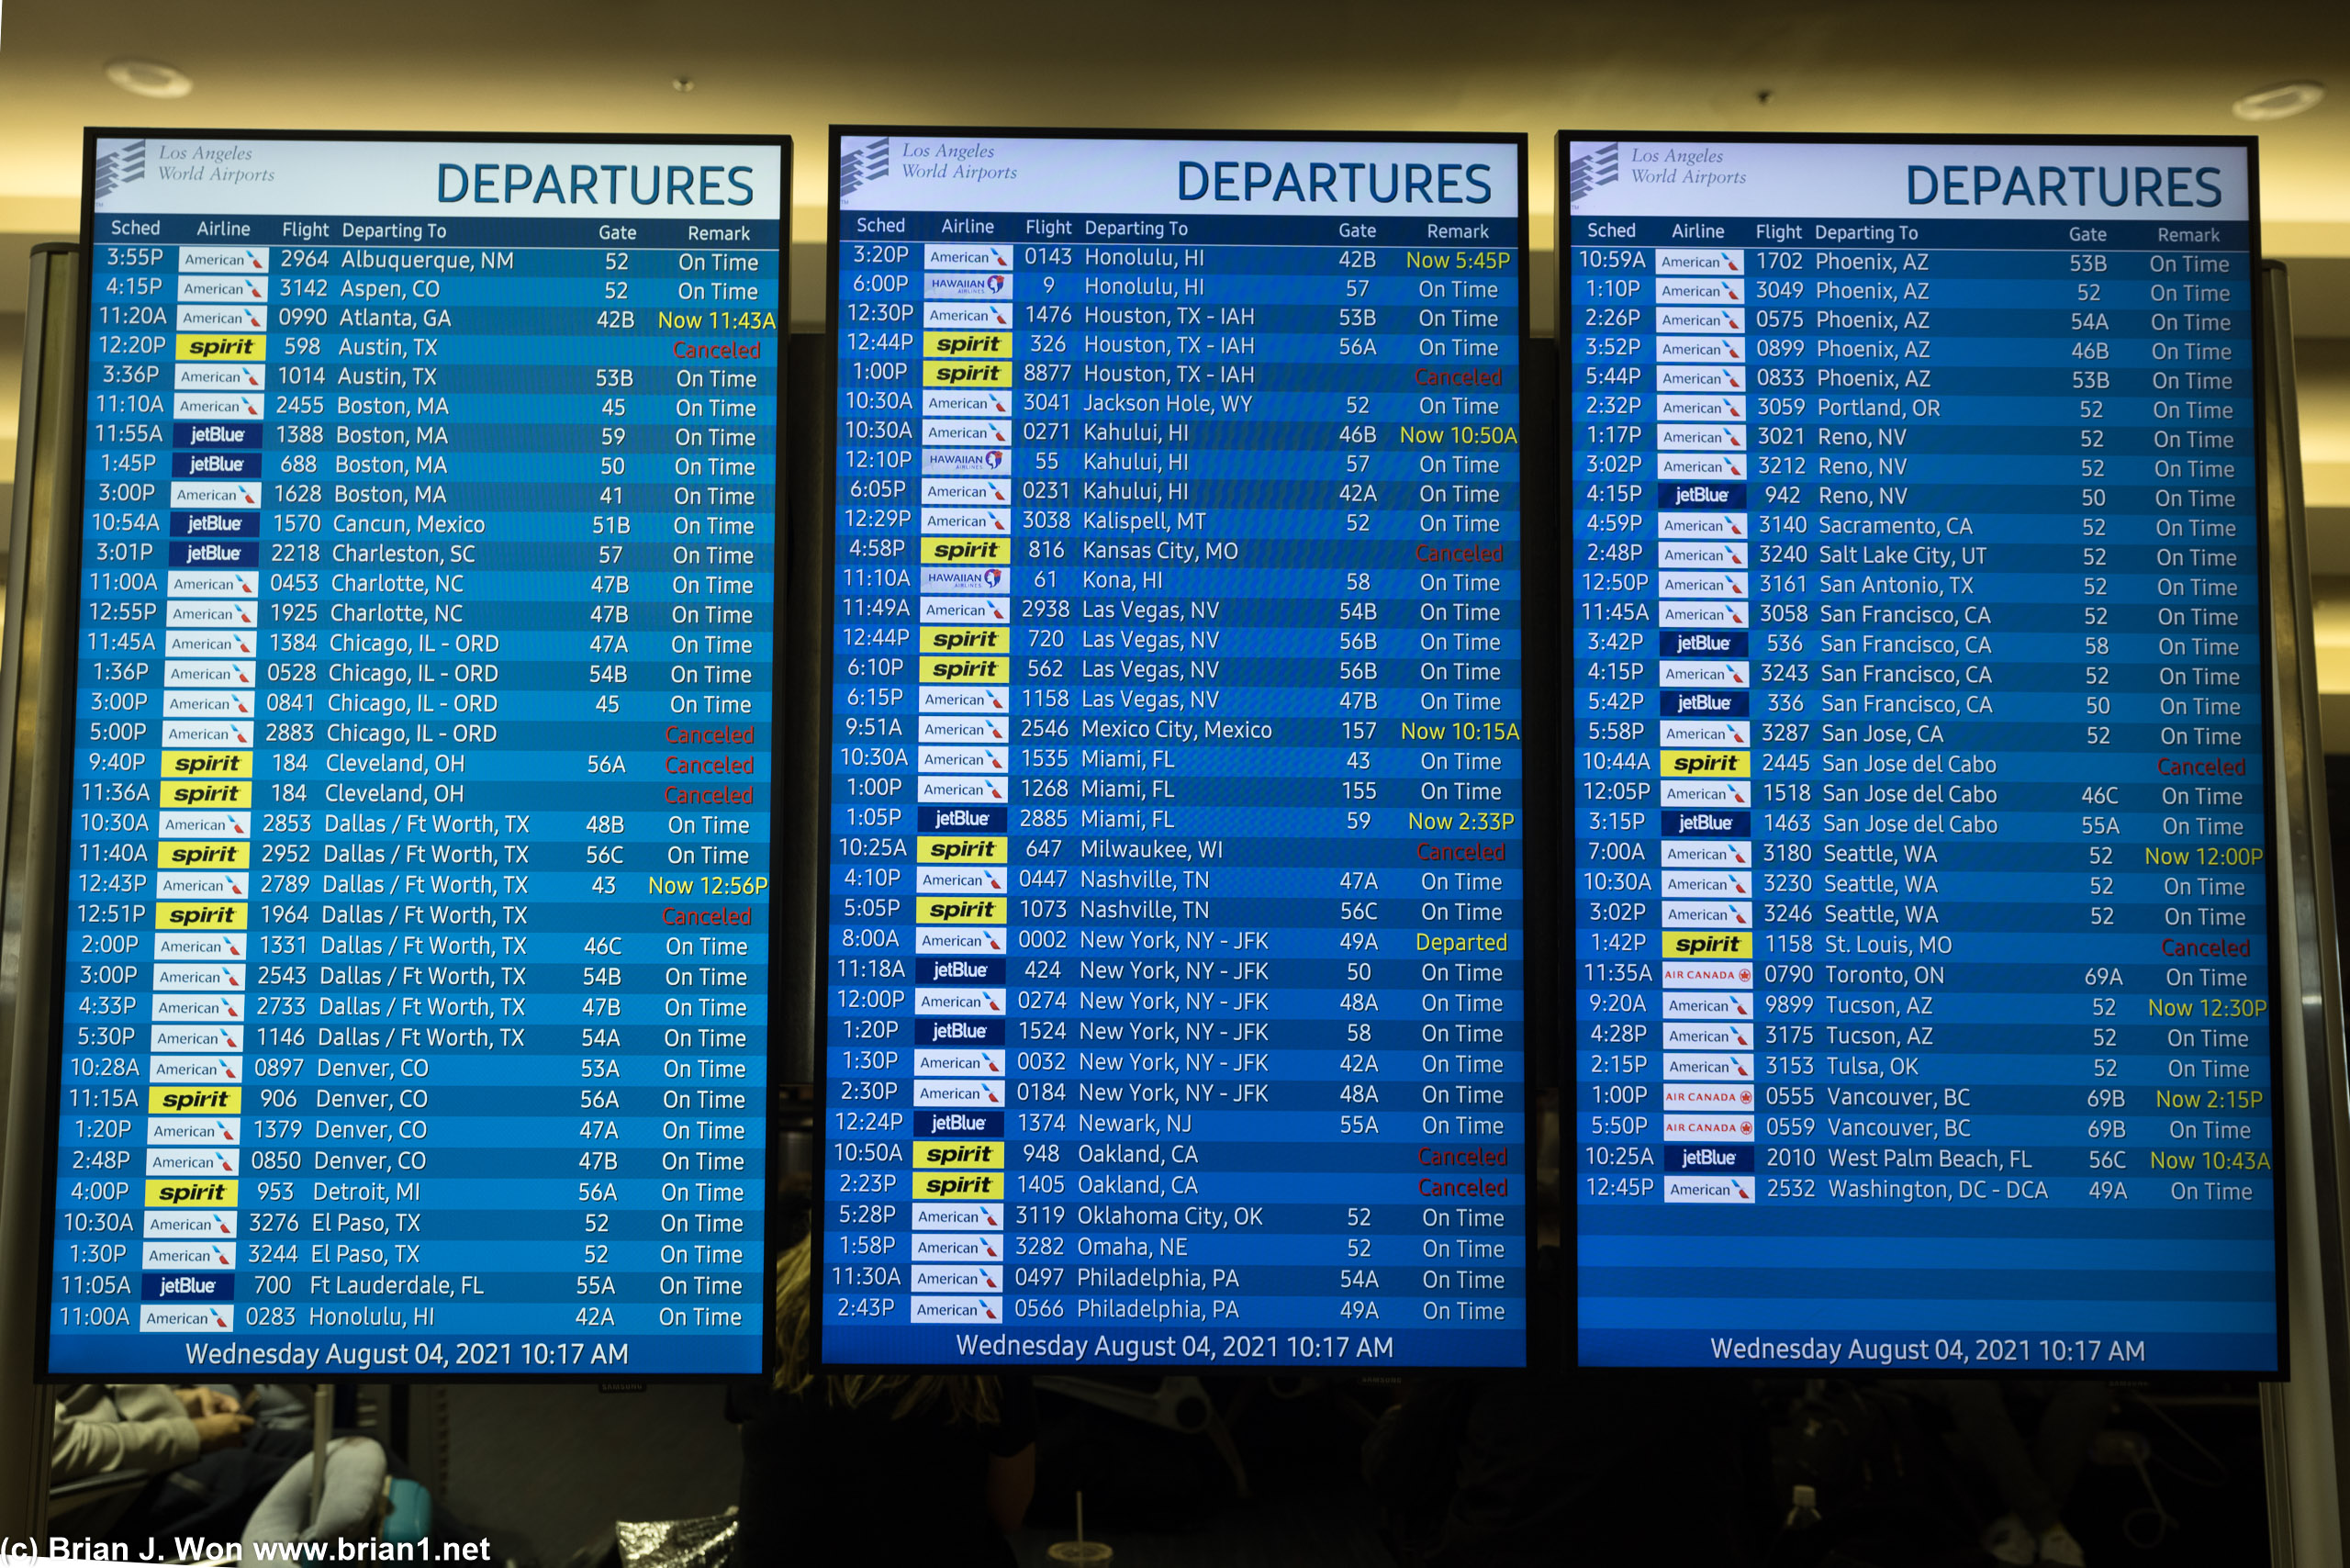 American Airlines, Spirit, and JetBlue keep terminals 4 and 5 pretty busy at LAX.